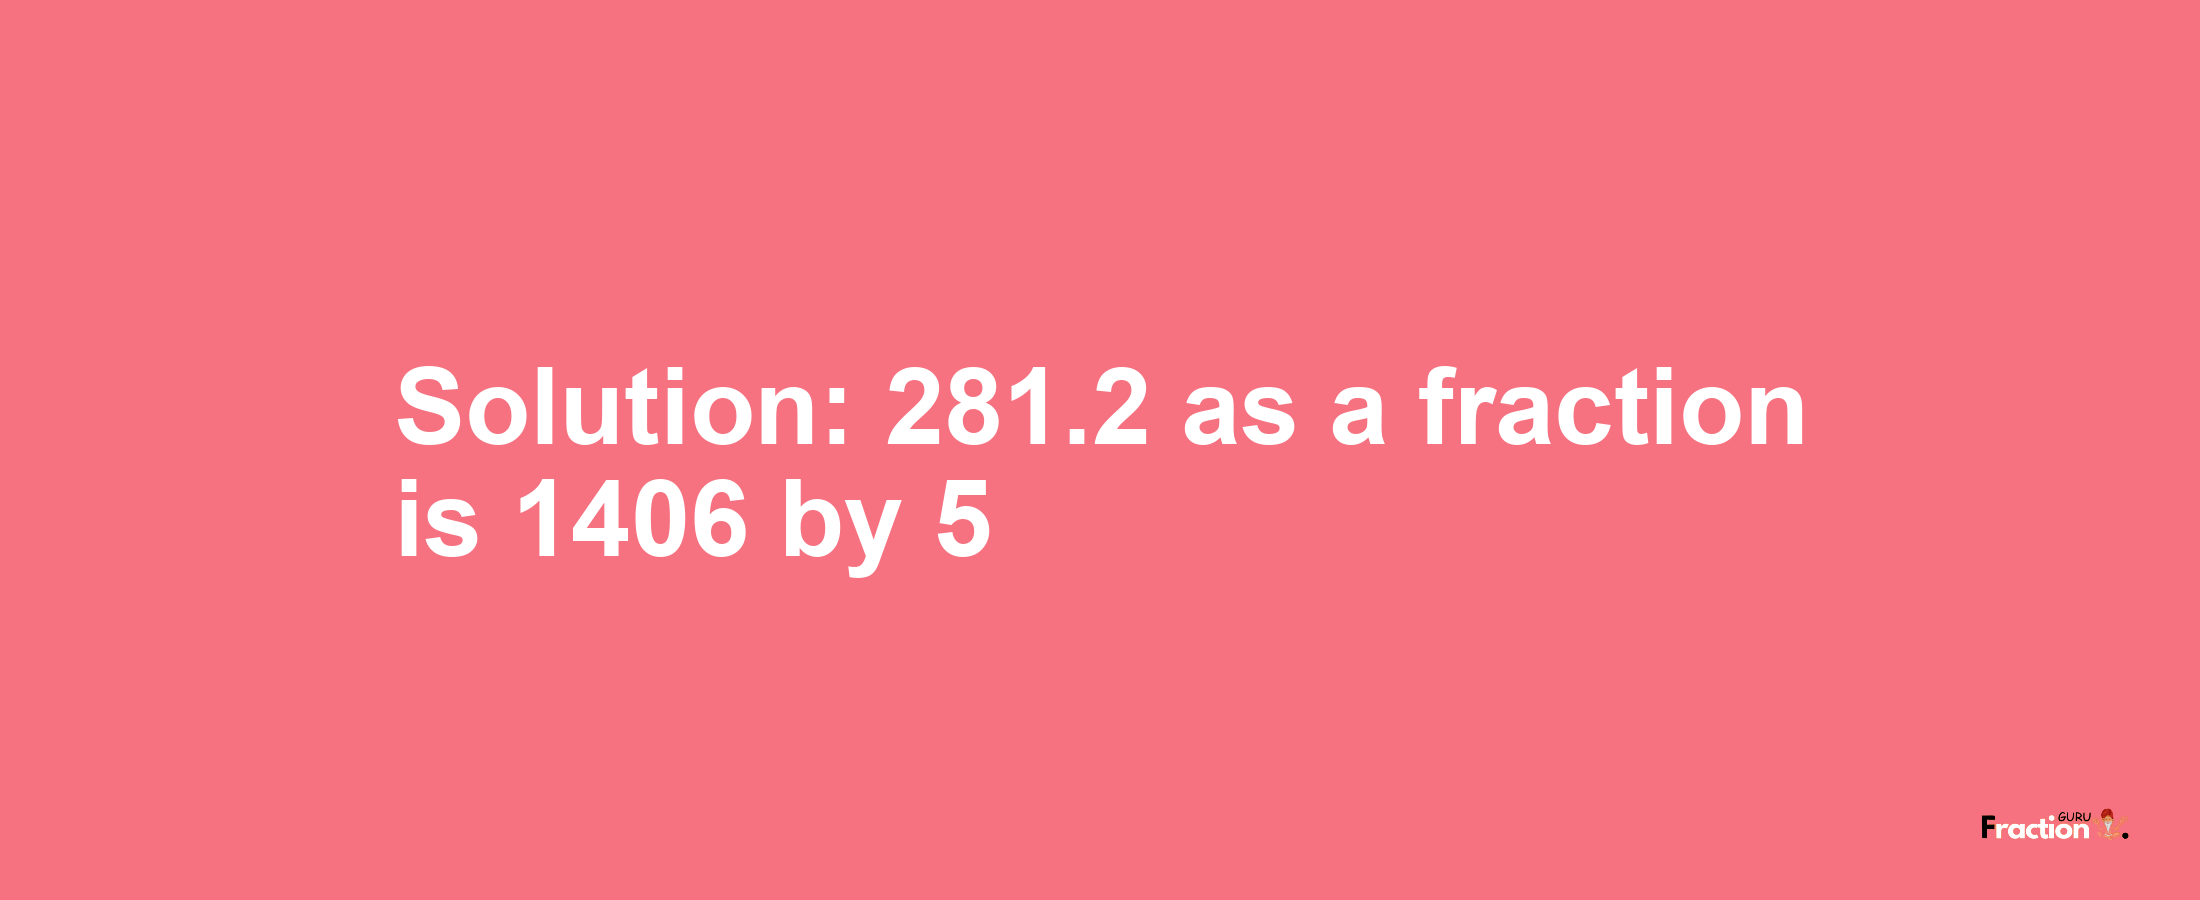 Solution:281.2 as a fraction is 1406/5